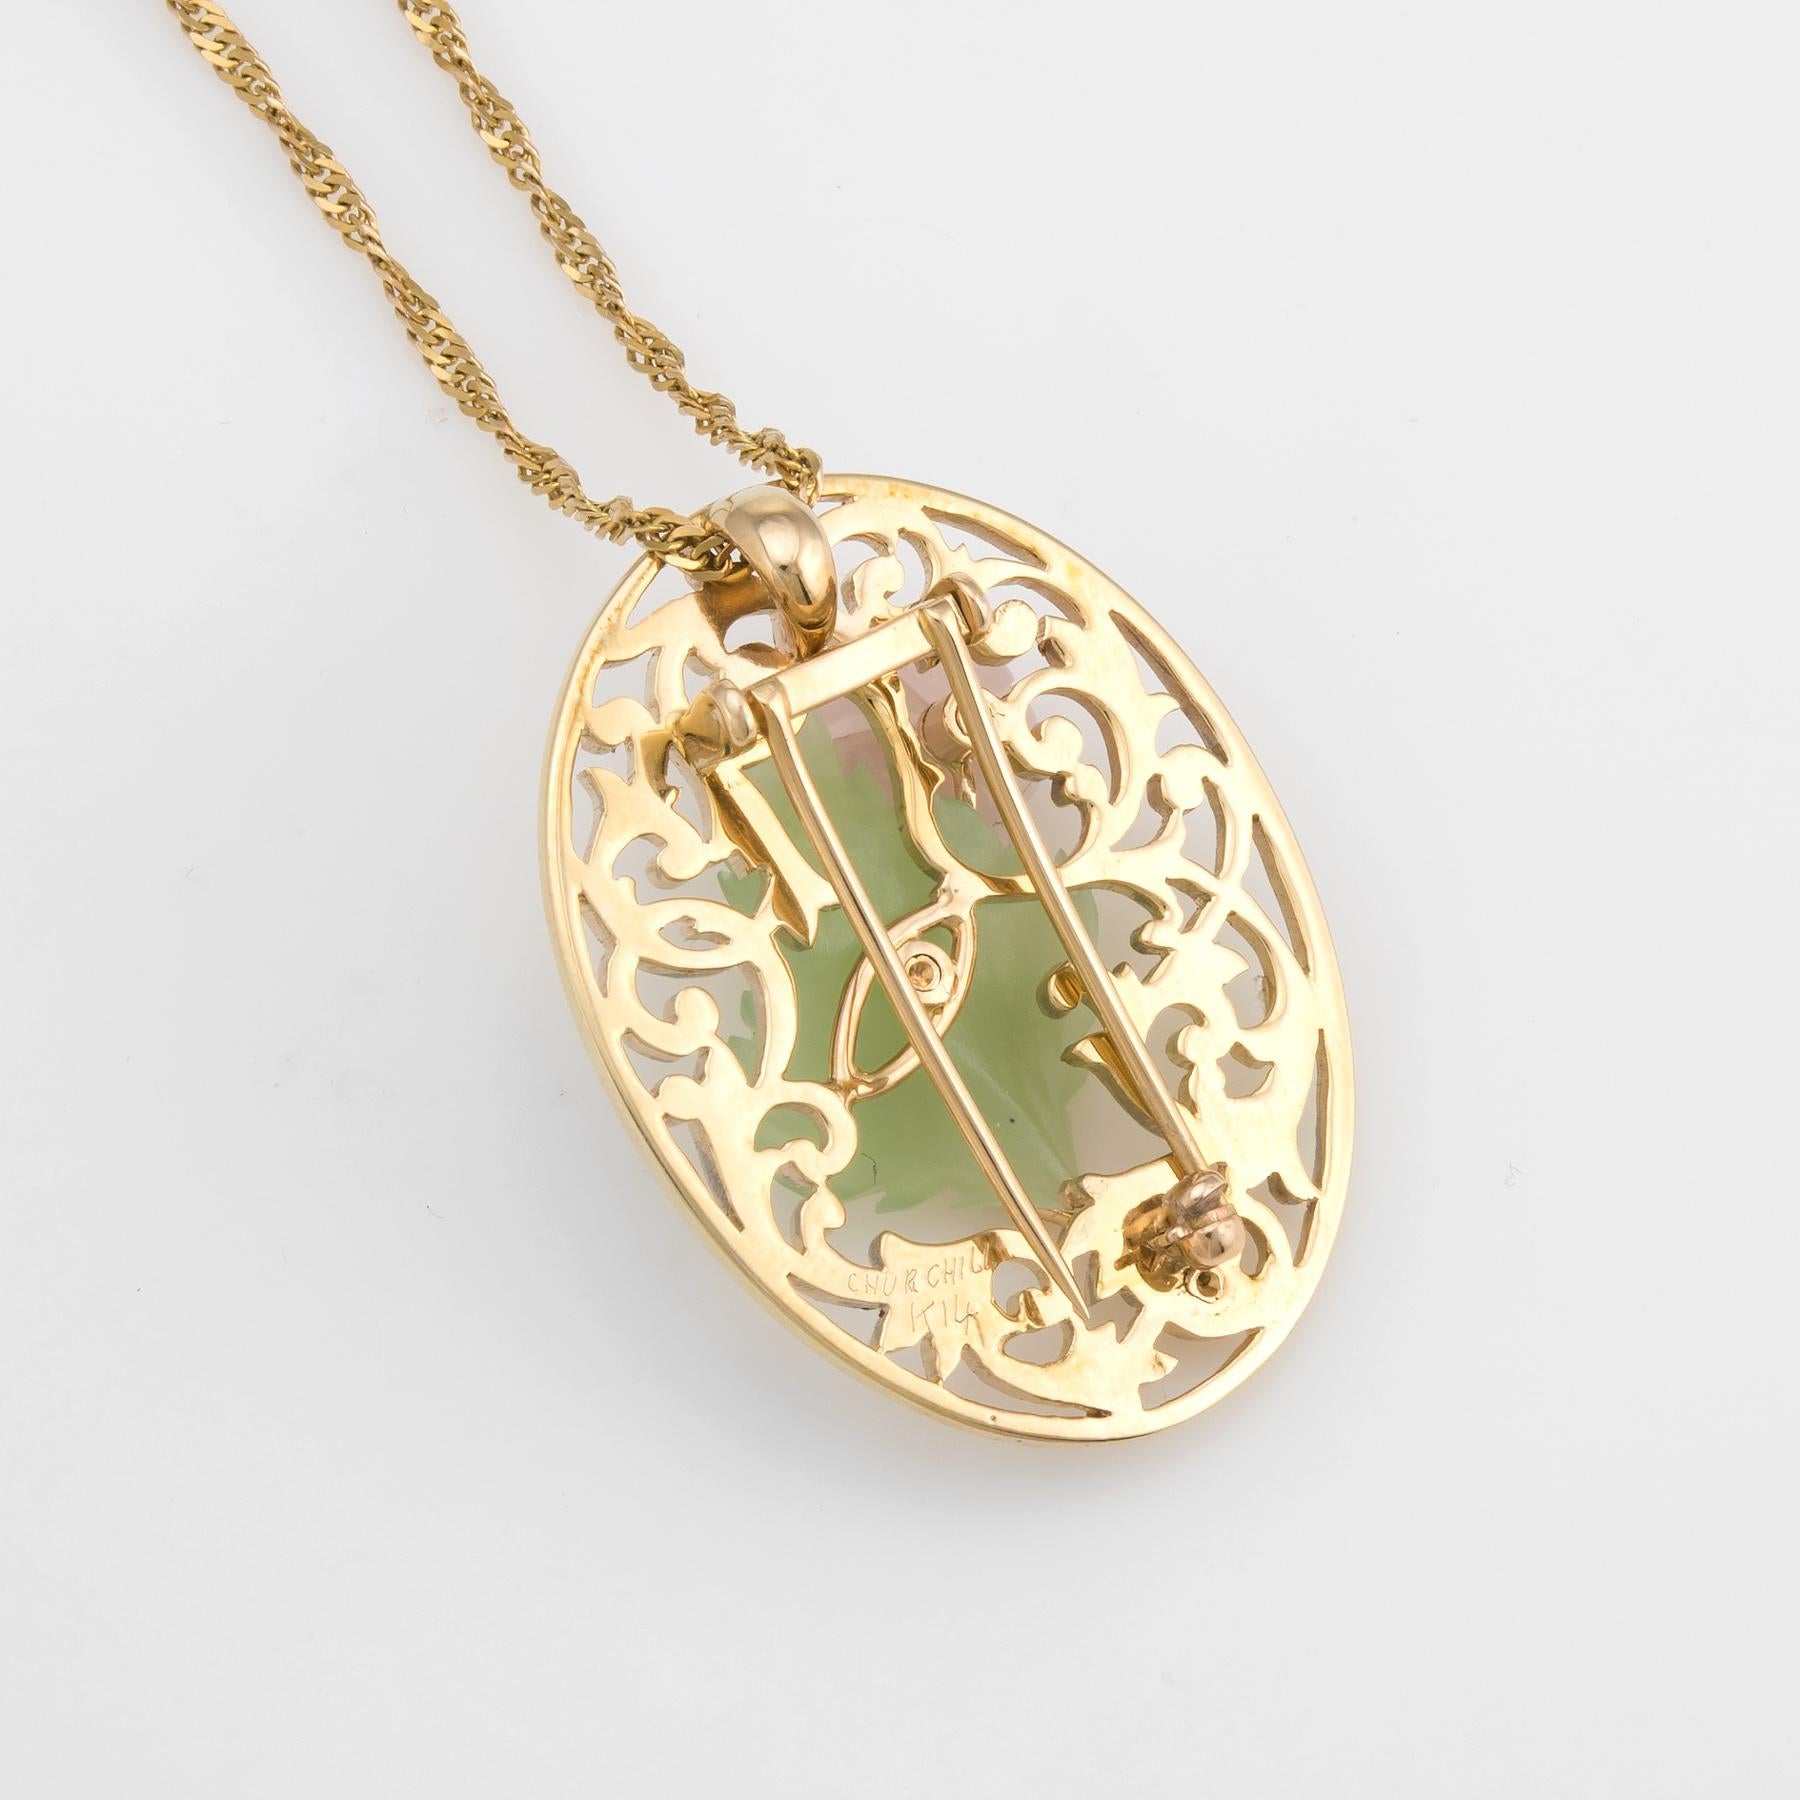 Finely detailed vintage flower pendant, crafted in 14 karat yellow gold.  

The carved green quartz leaf measures 20mm x 18mm and the smaller pink flower is carved in rose quartz measuring 9mm. The diamonds total an estimated 0.17 carats (estimated